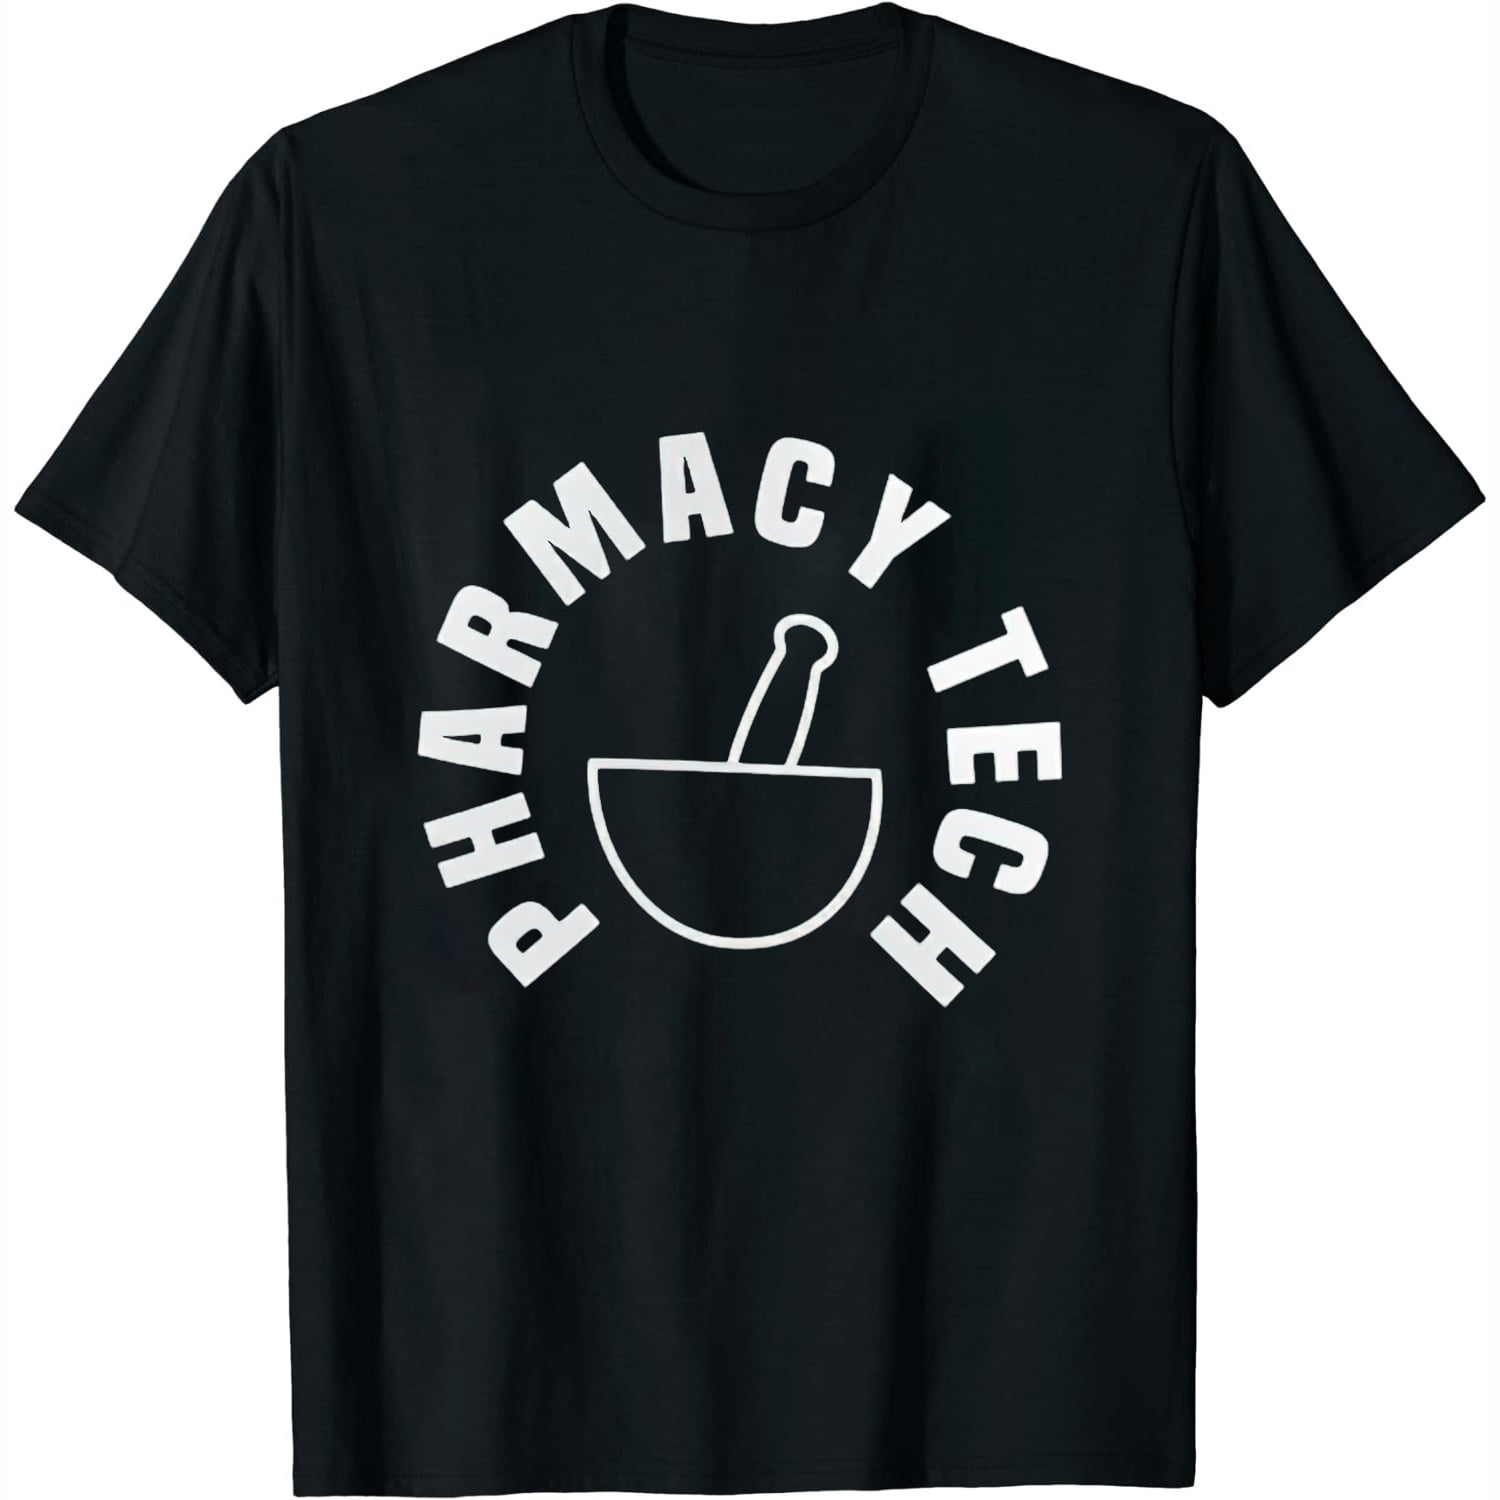 Womens T Shirt Great Pharmacy Tech Pocket Design With Mortar And Pestle ...